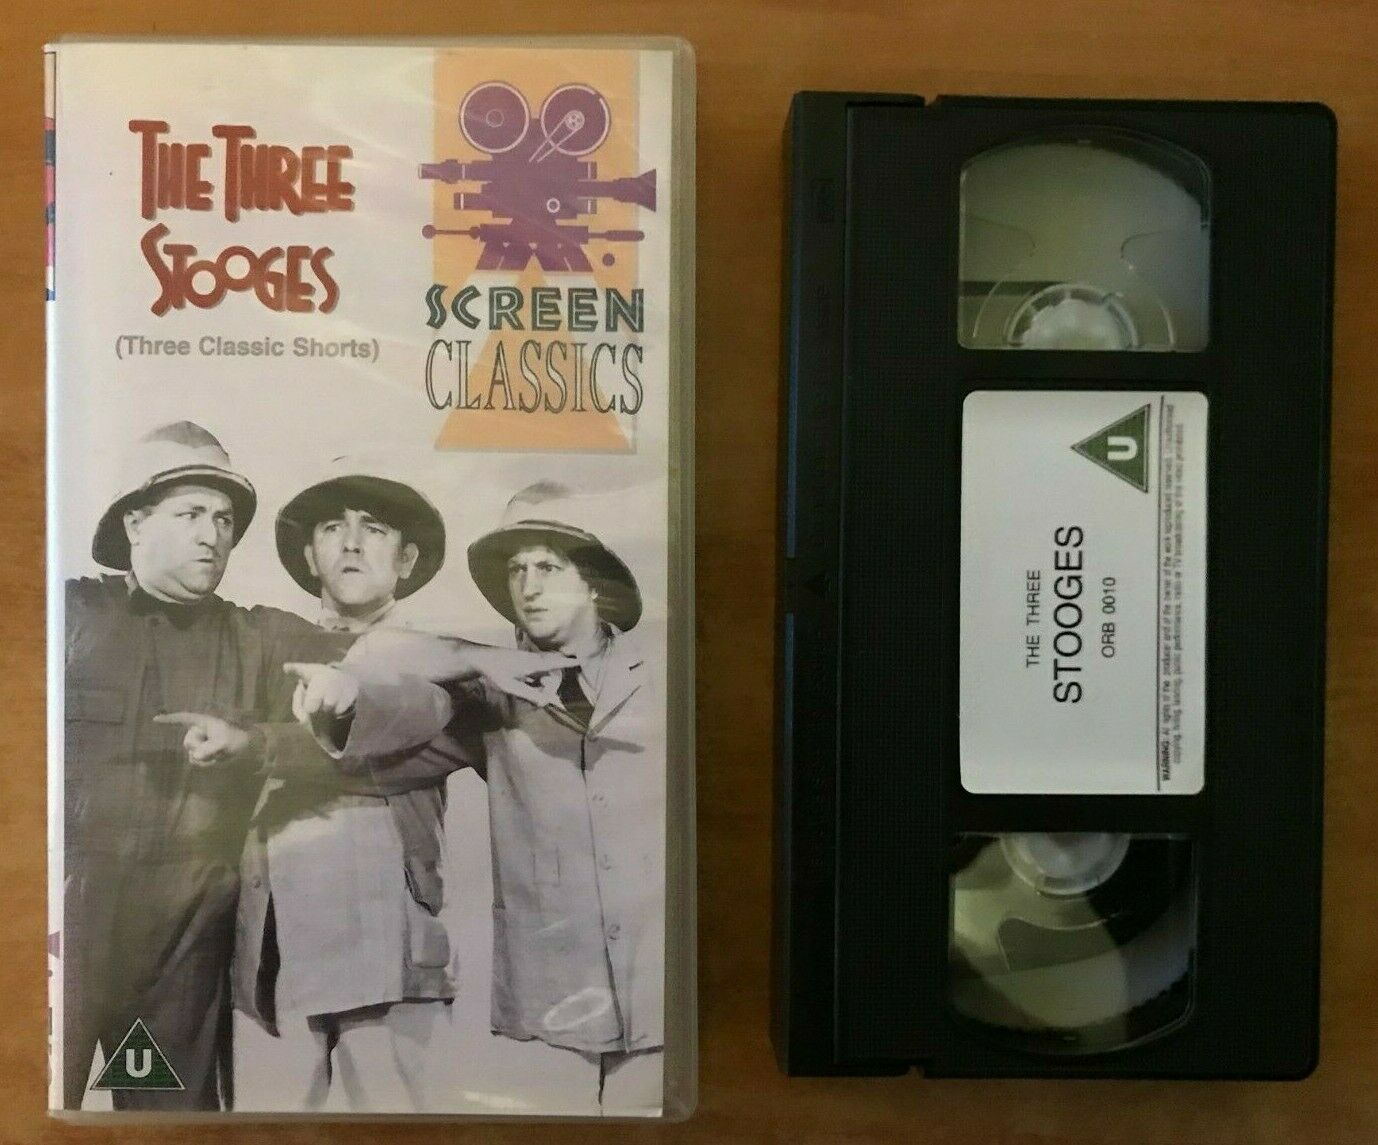 The Three Stooges (3 Classic Shorts): Bridless Groom - TV Series - Comedy - VHS-